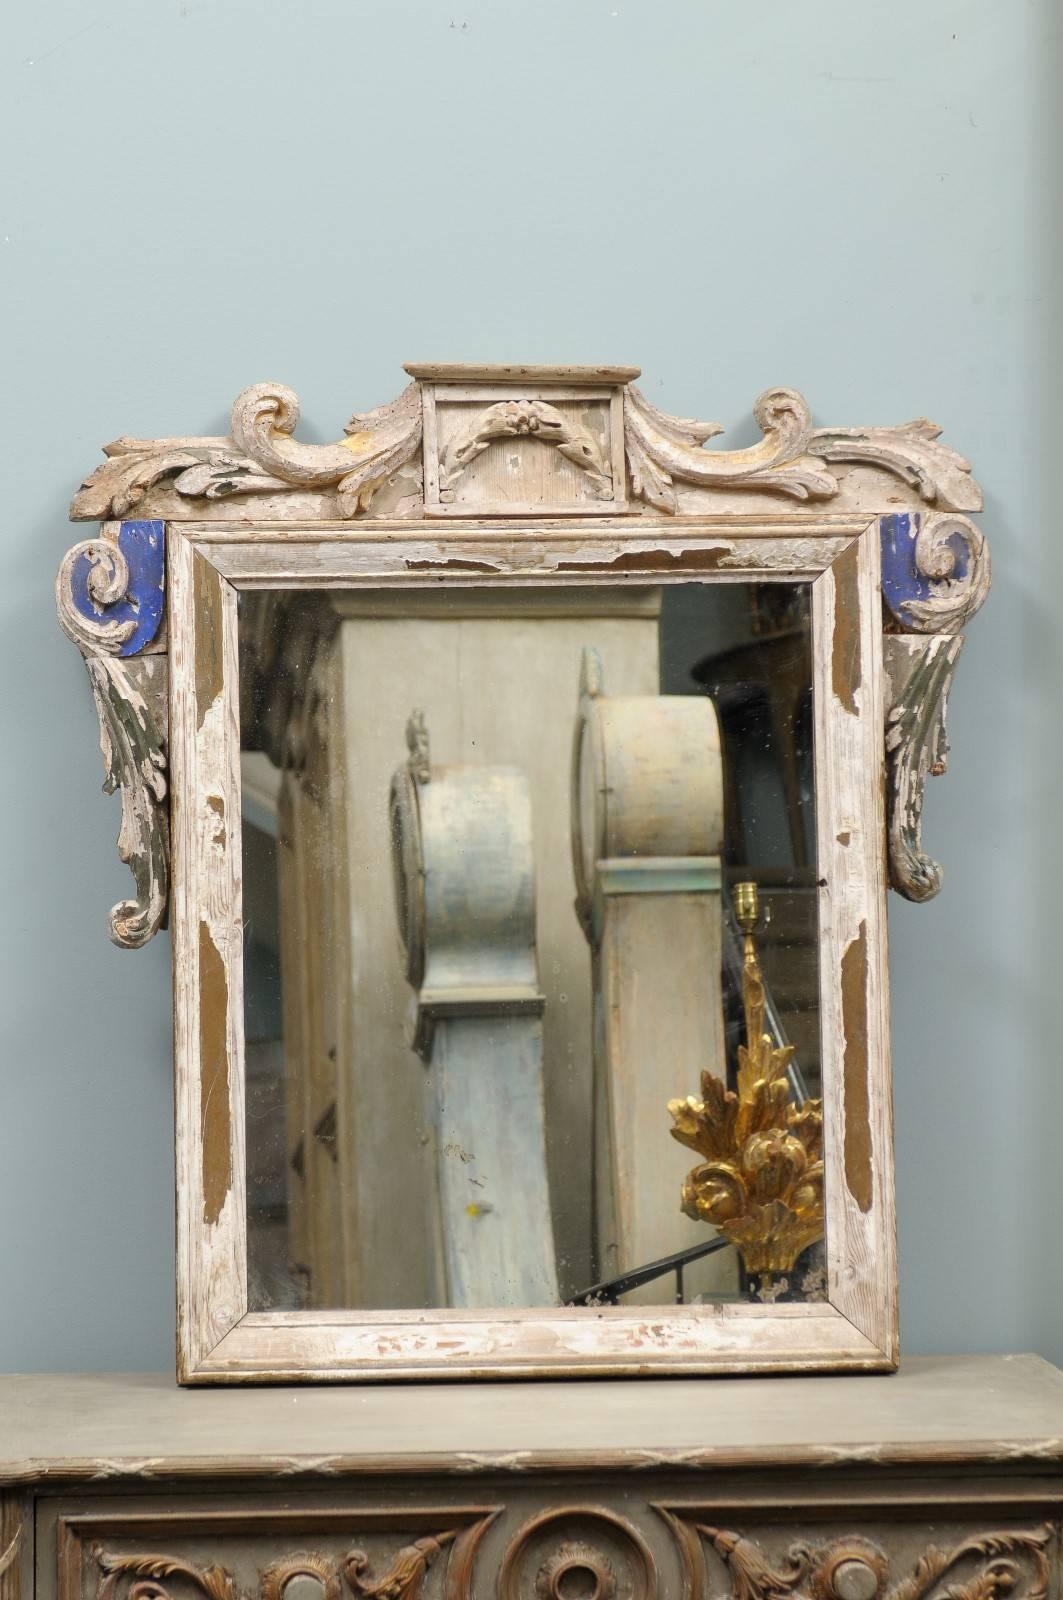 A carved Italian wood mirror made out of an old 19th century fragments. This Italian mirror features a nicely aged frame made of fragments. The crest is elegantly decorated with foliage motifs while the sides are ornate in their upper section with